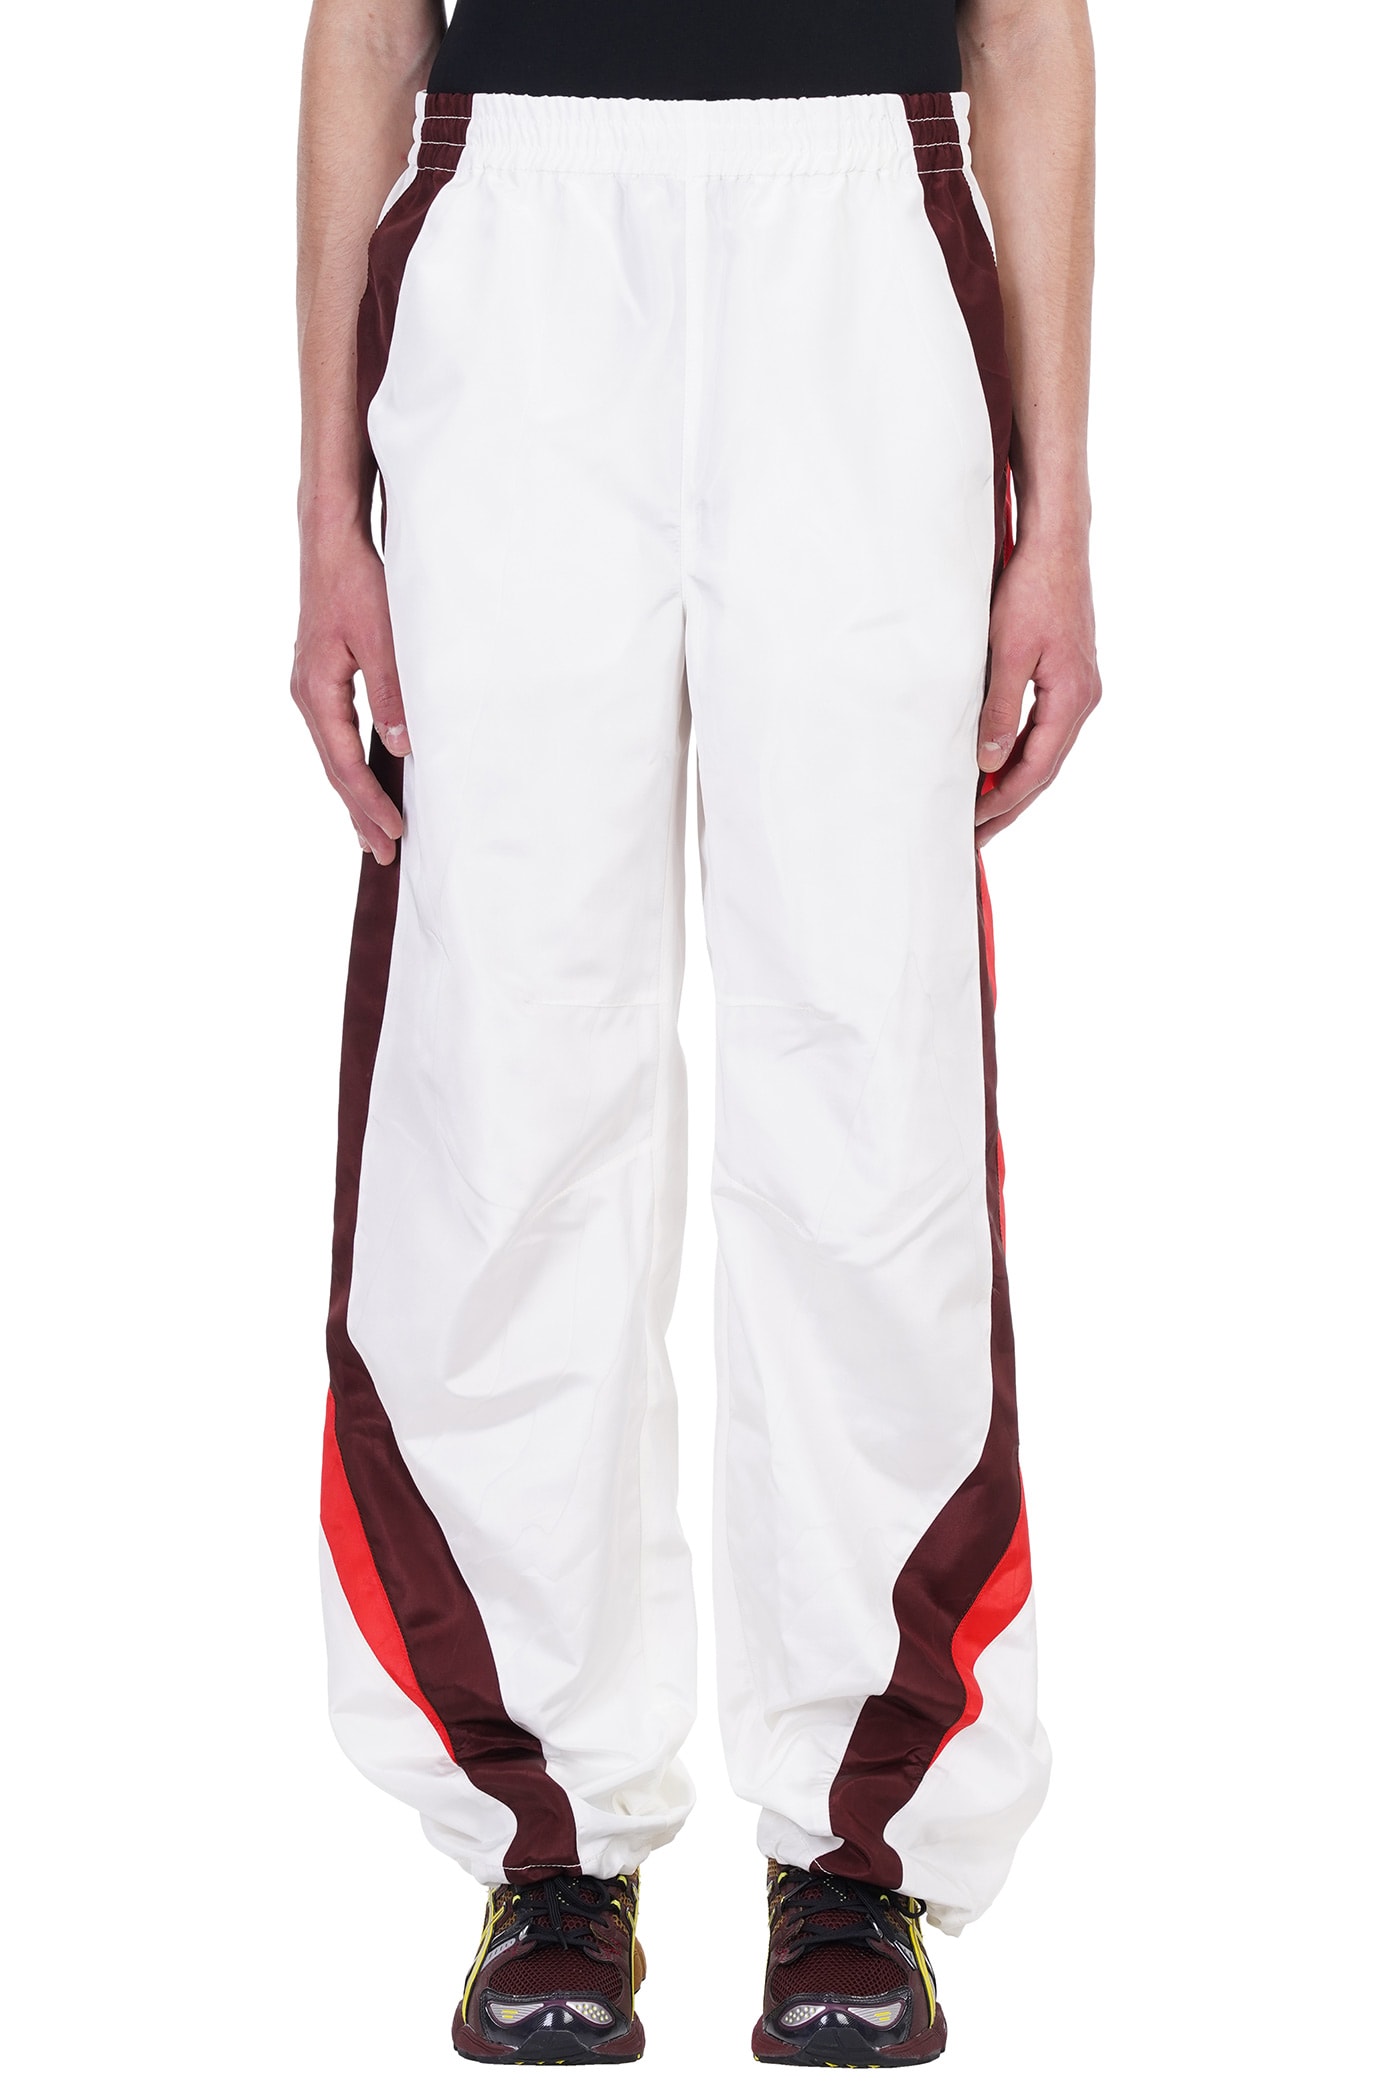 Marine Serre Pants In White Polyester